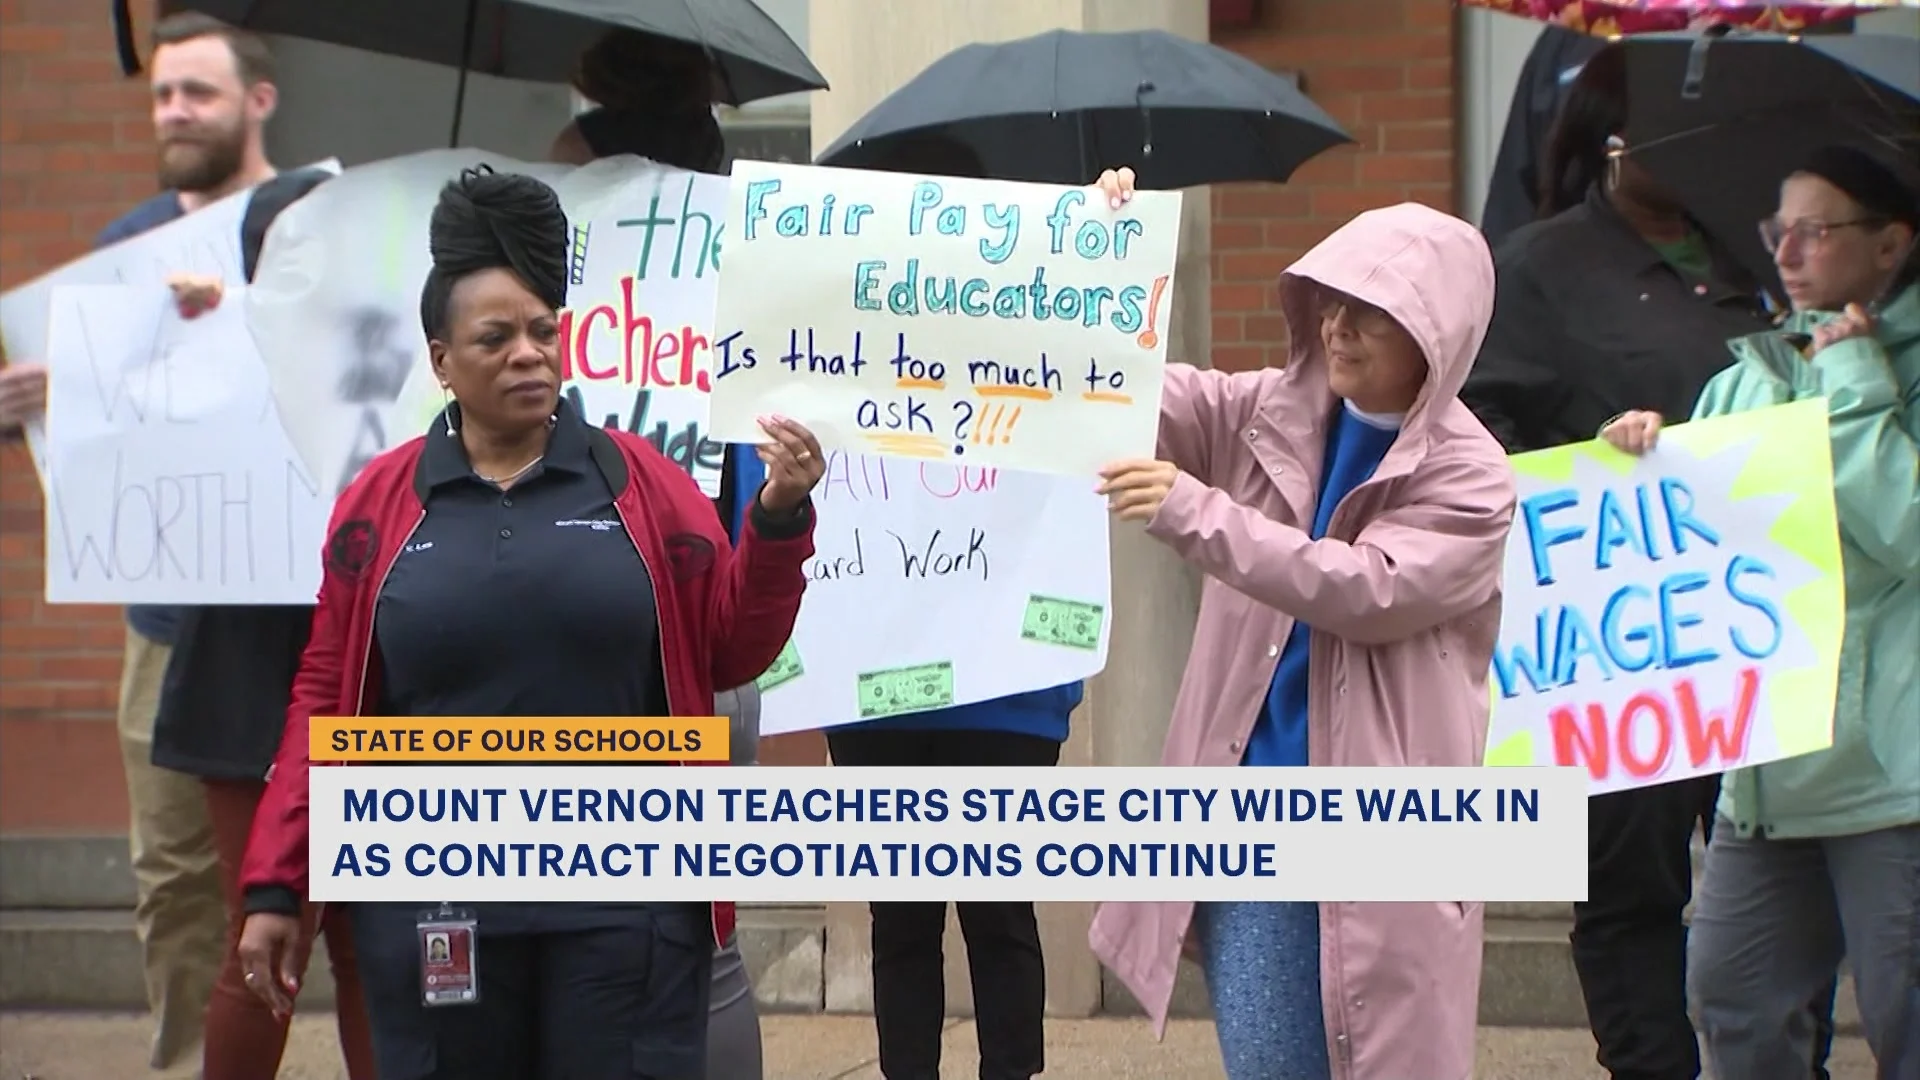 Mount Vernon teachers demand contract negotiations with ‘We mean business’ walk-in protest